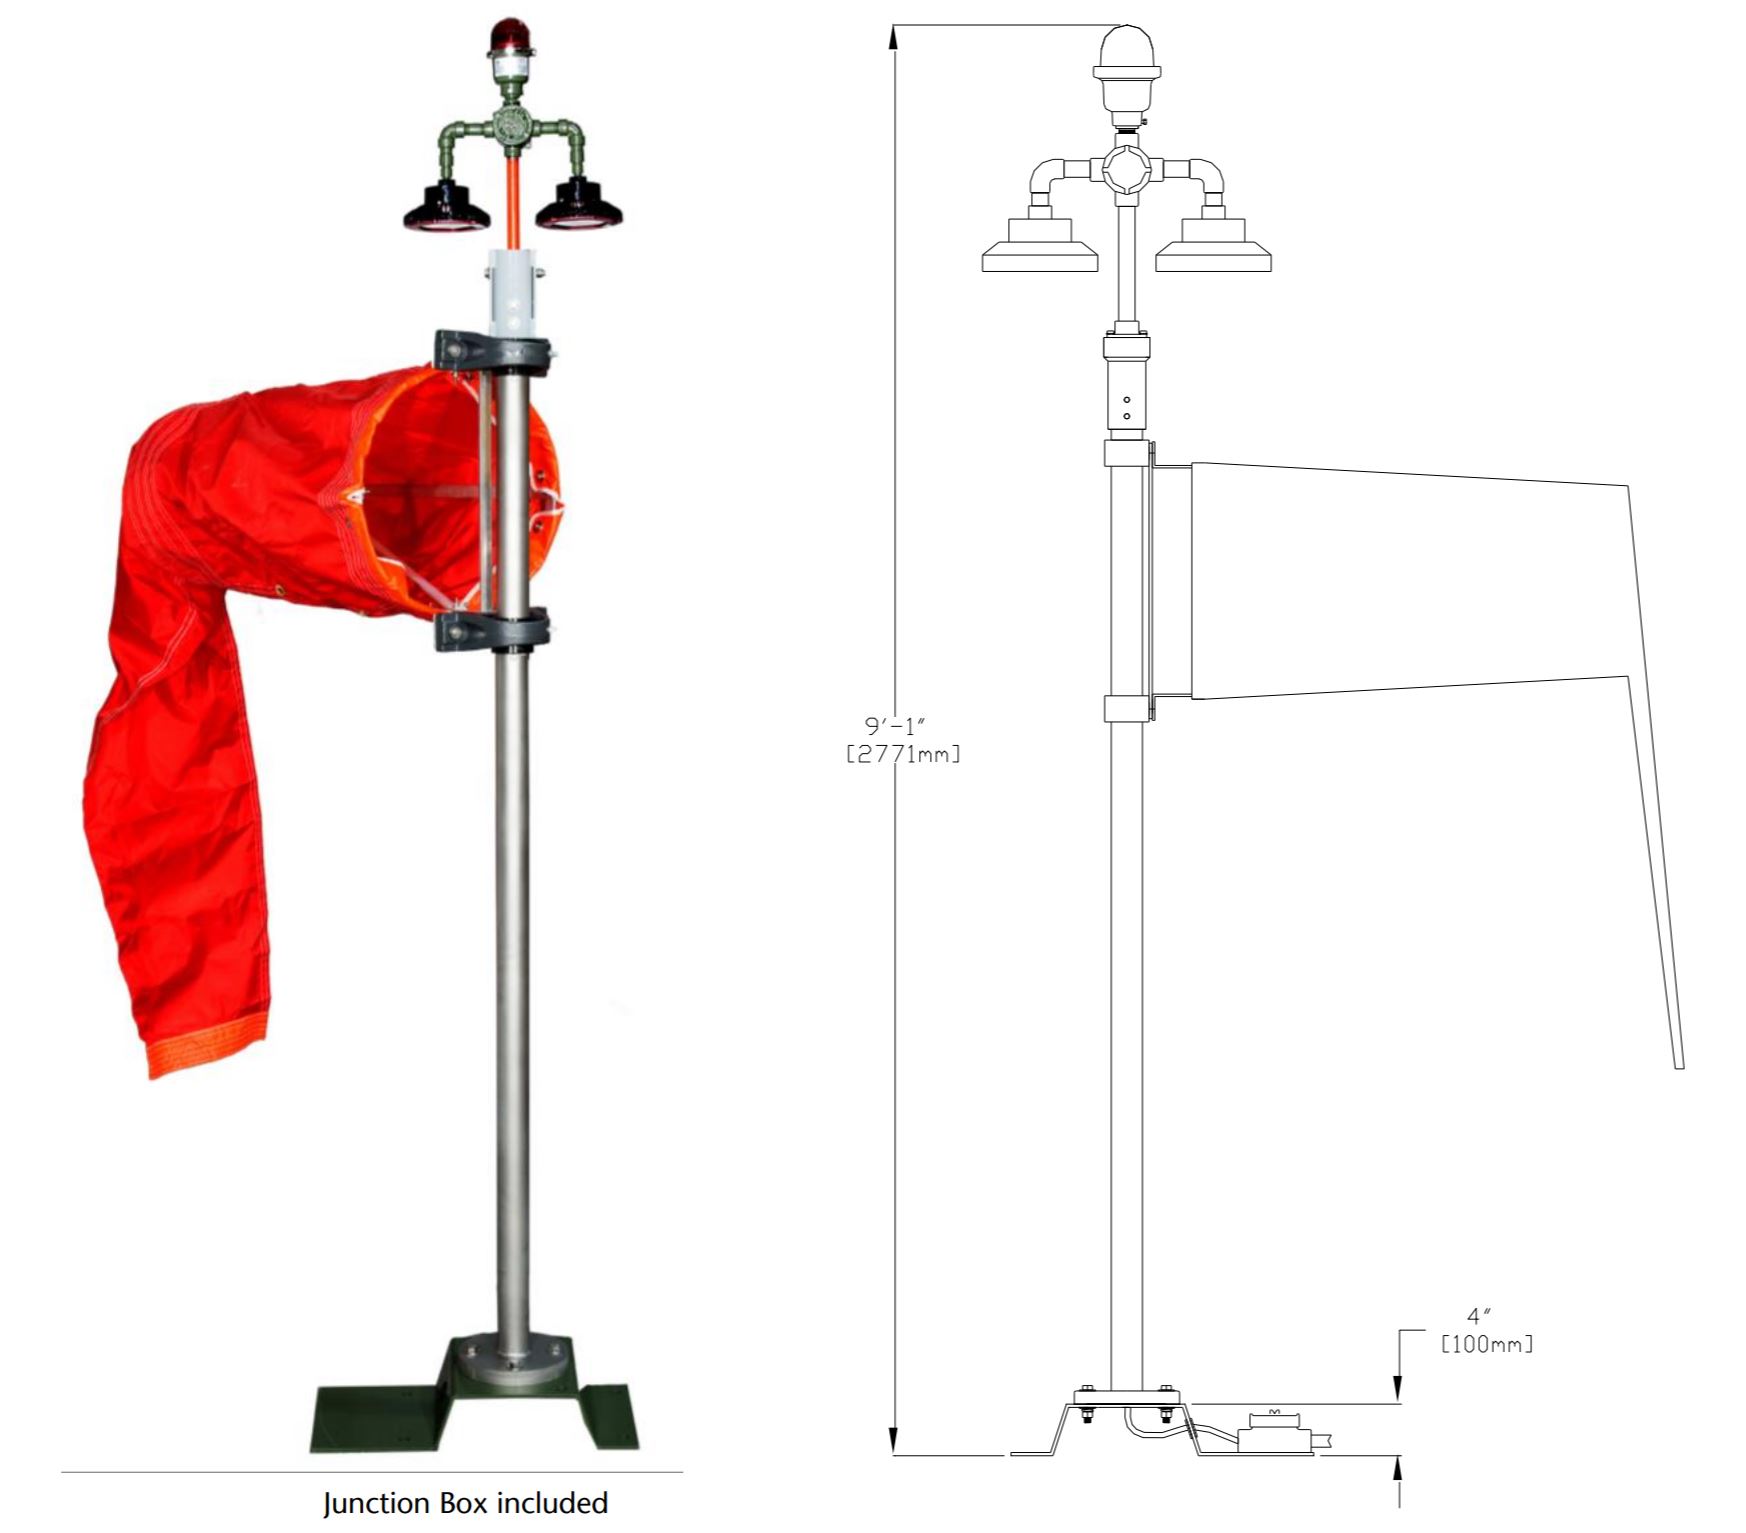 Solar Portable Wind Cone, Airport Solar Windsock, L-806 & L-806(L) Wind Cone, FAA Certified Airport Wind Cones, Internally LED lighted wind cone, Wind Cone L-806 & L-806(L) Wind Cone, FAA Certified Airport Wind Cones, L-806 Wind Cone provides a visual indication of wind direction and velocity, L-807 Wind Cone provides a visual indication of wind direction and velocity, L-806 & L-807 Wind Cone Light Kits. Solar Permanent LED Wind Cone, Solar Series Portable LED Wind Cone. Airport / Heliport Nylon Windsocks